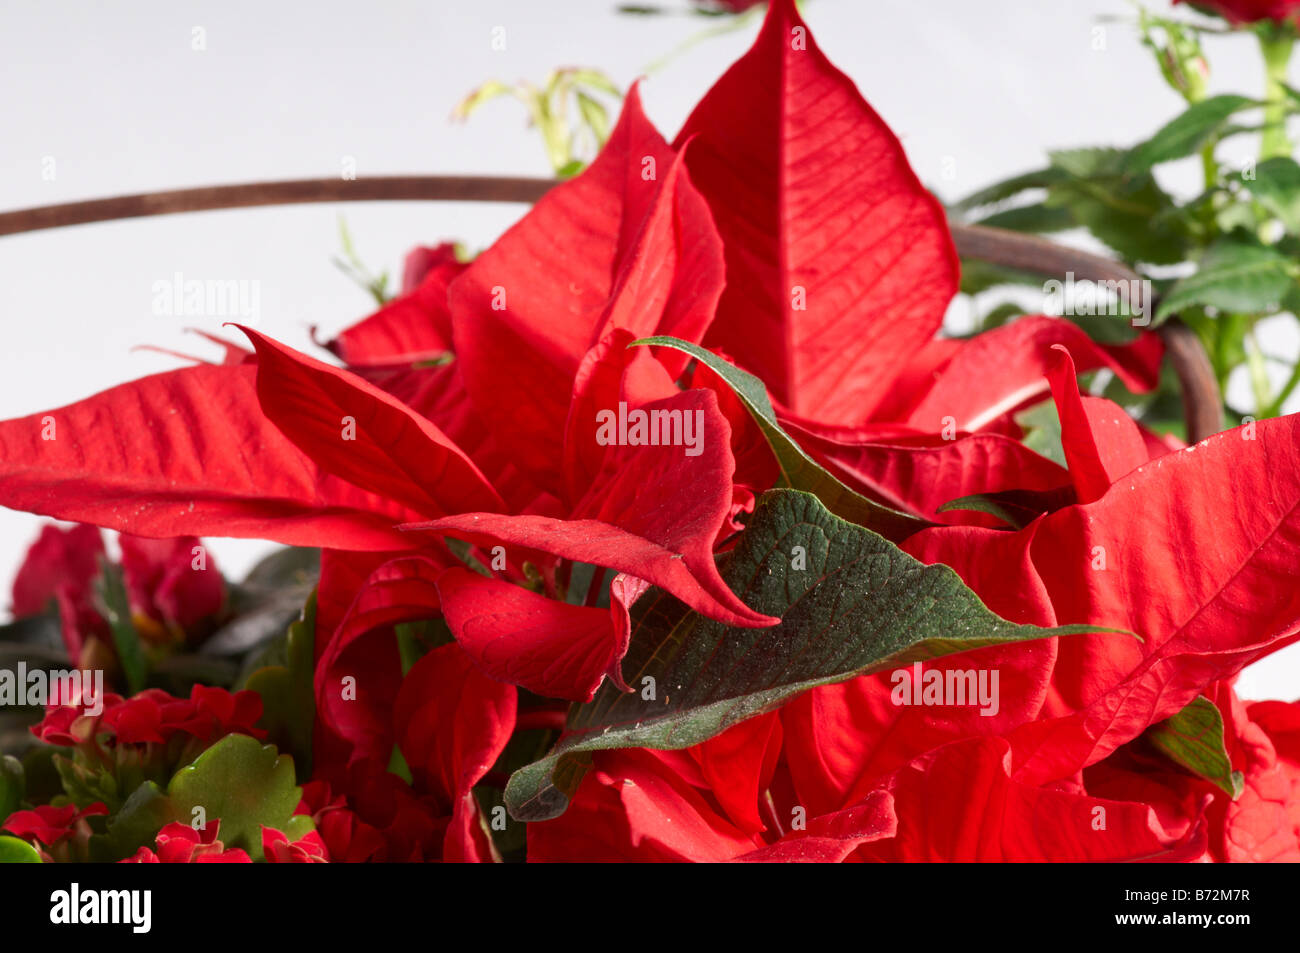 Still life of red Christmas plants in basket Poinsettia. Interflora gift. Stock Photo